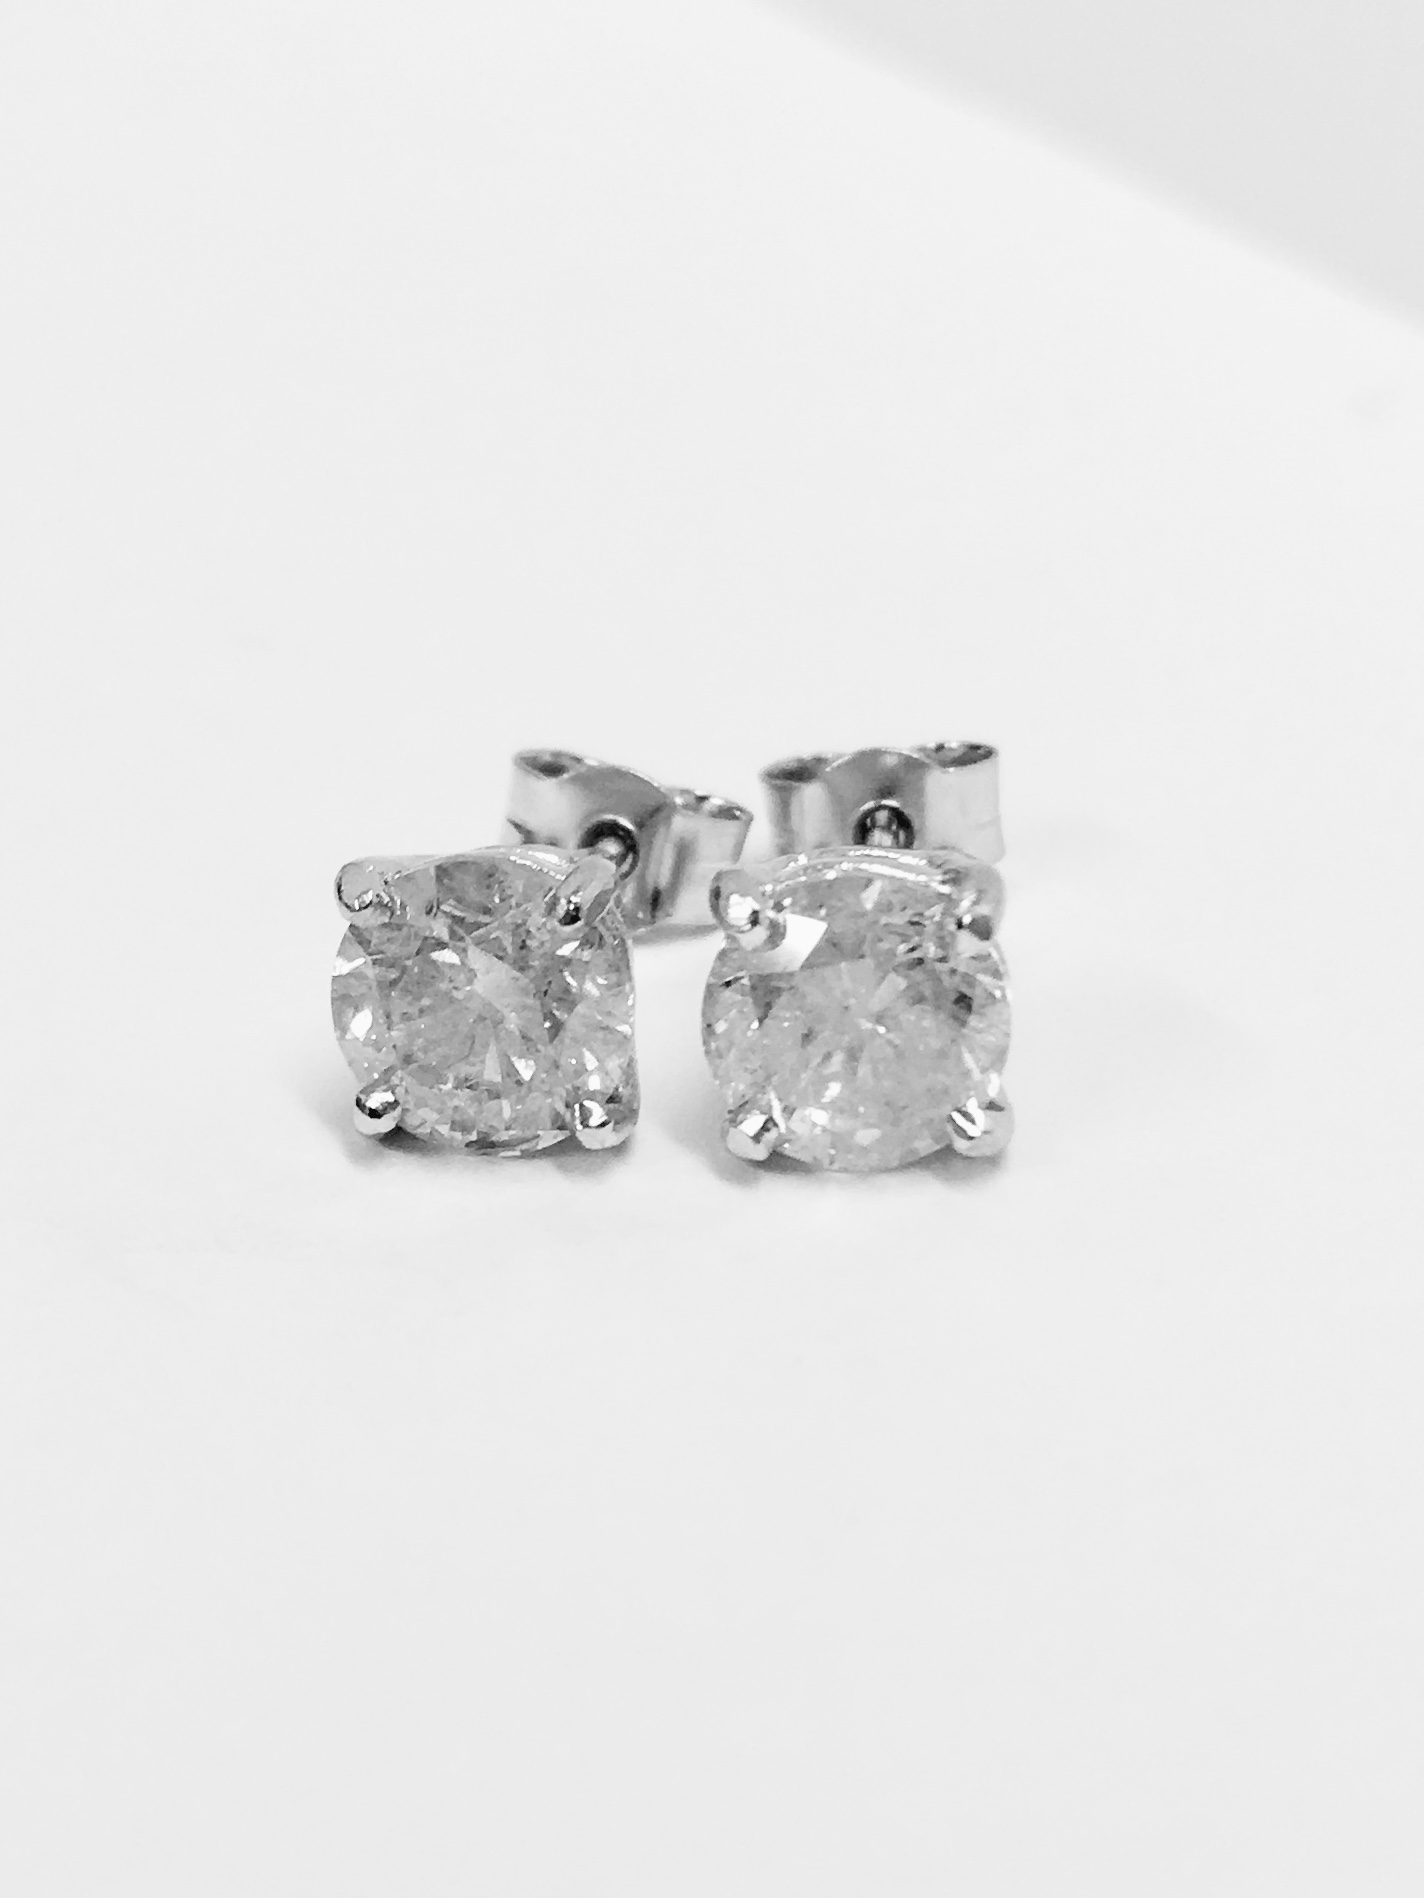 1ct diamond solitaire earrings - Image 2 of 24